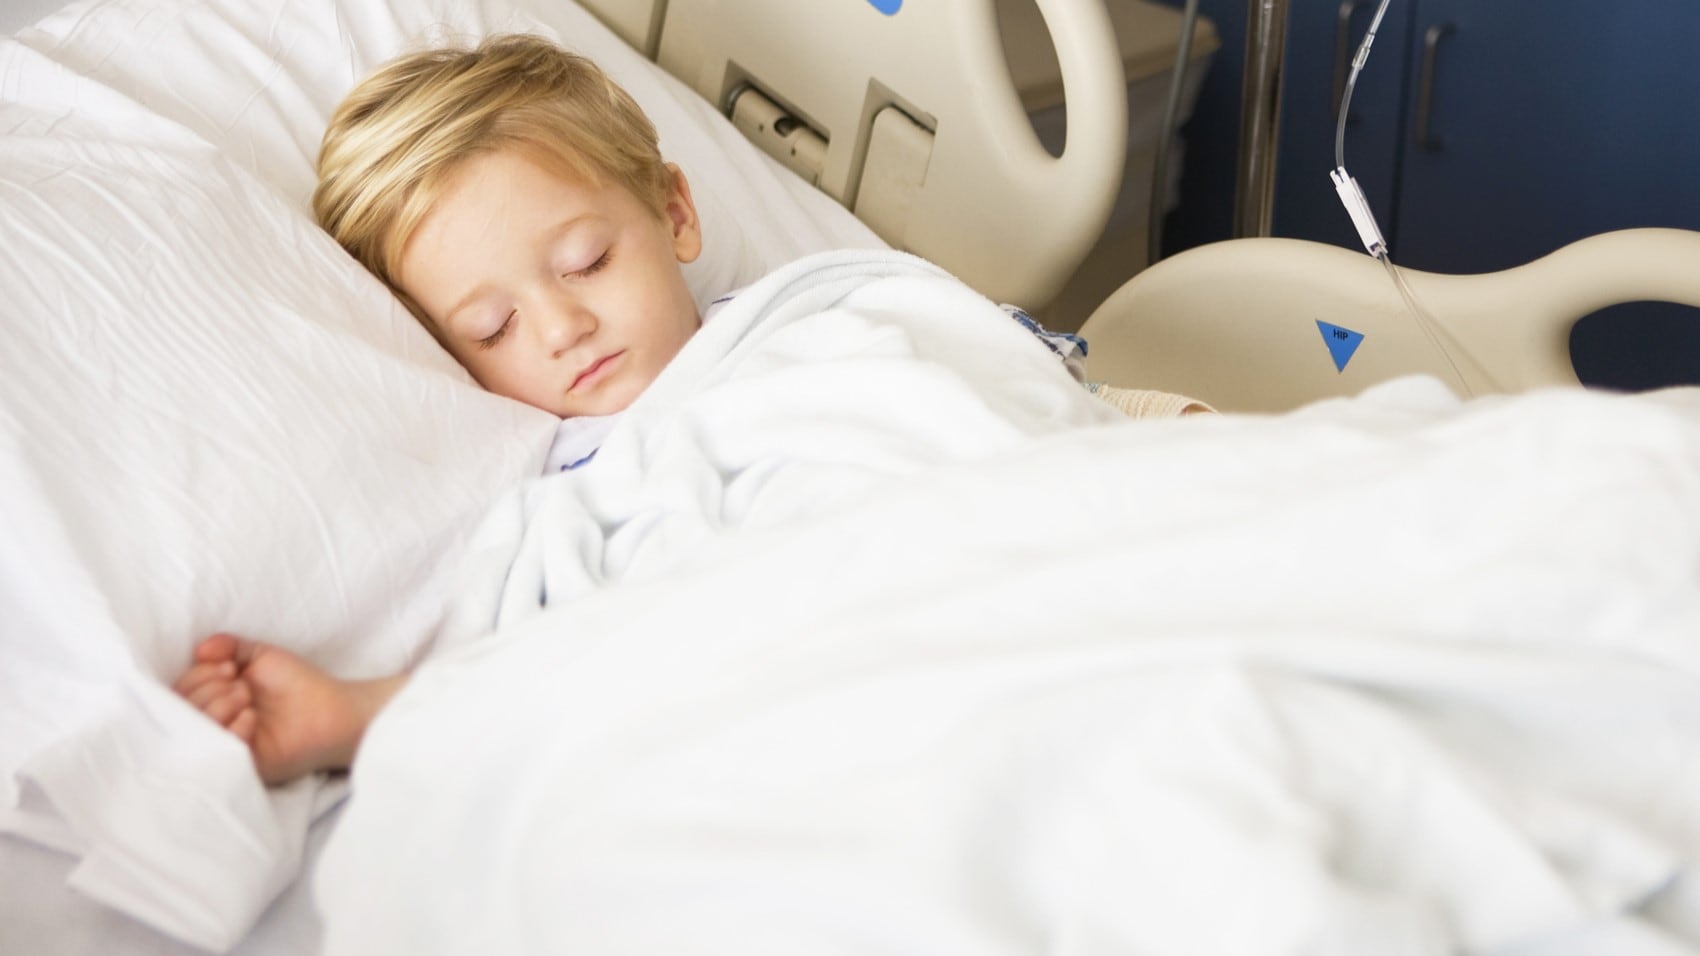 A young child with blonde hair laying in a hospital bed sleeping.